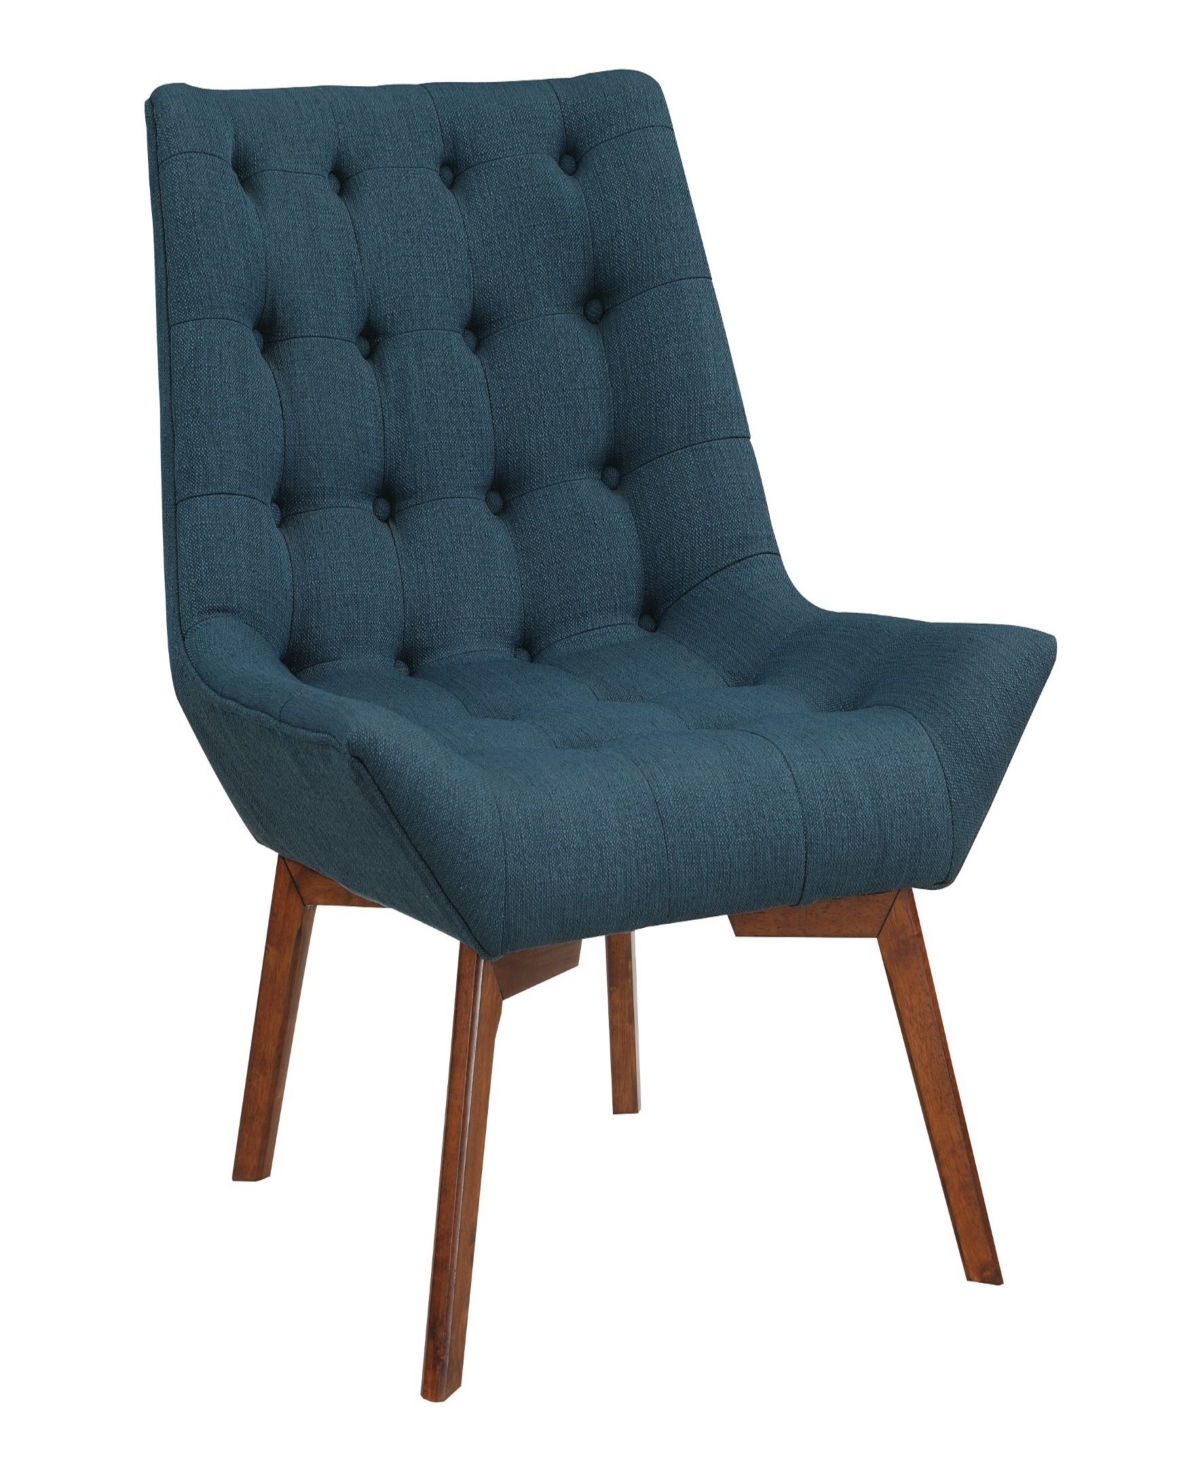 Shop Osp Home Furnishings Office Star 33.5" Wood, Fabric Shelly Tufted Chair In Azure